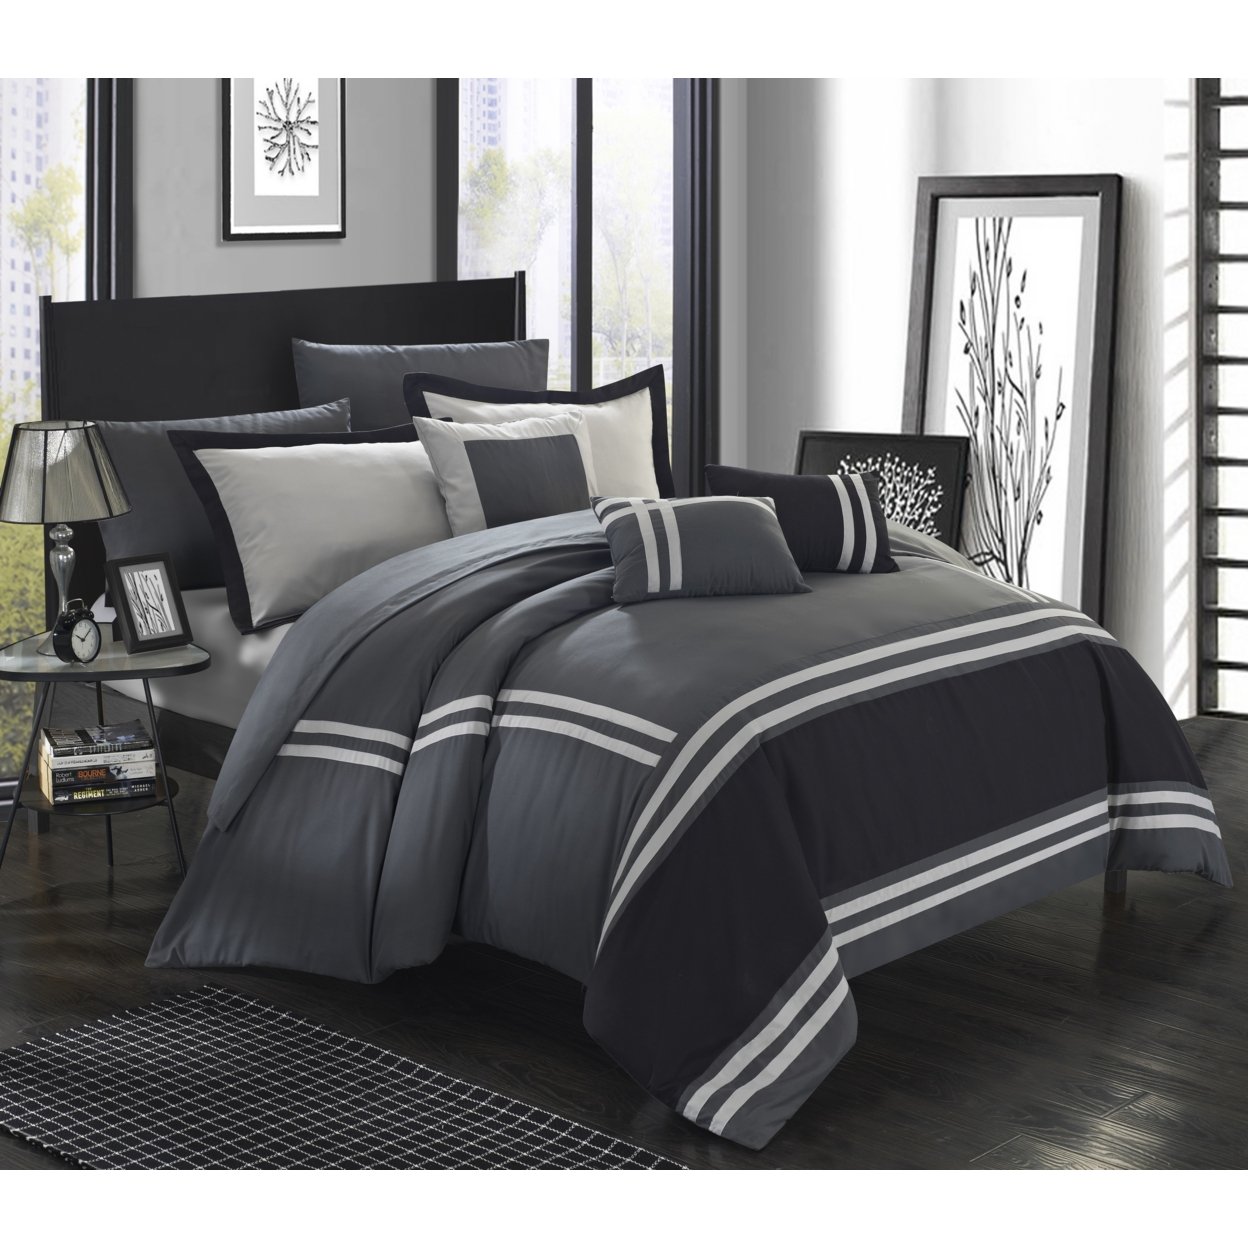 Chic Home 10 Piece Annabel Supersoft Oversized Pieced Color Block Banding Collection Bed In A Bag Comforter Set - Grey, King